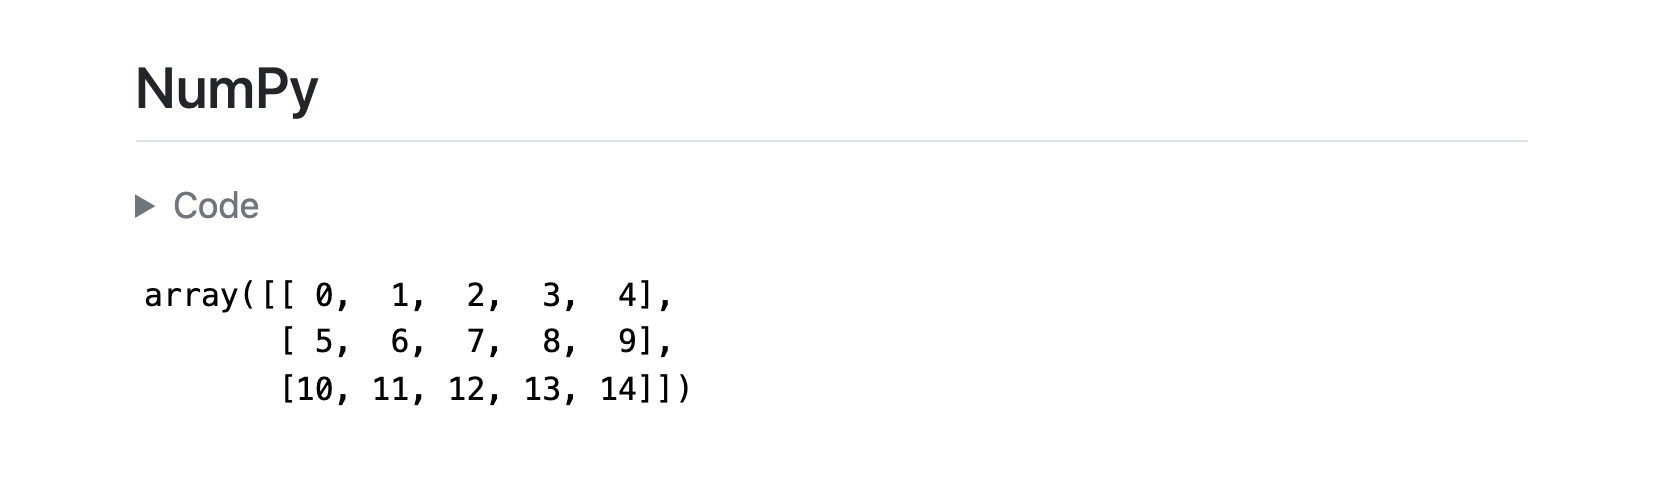 Screen shot of rendered NumPy section of Jupyter notebook which shows a toggleable section that is labelled 'Code' and the resulting array.